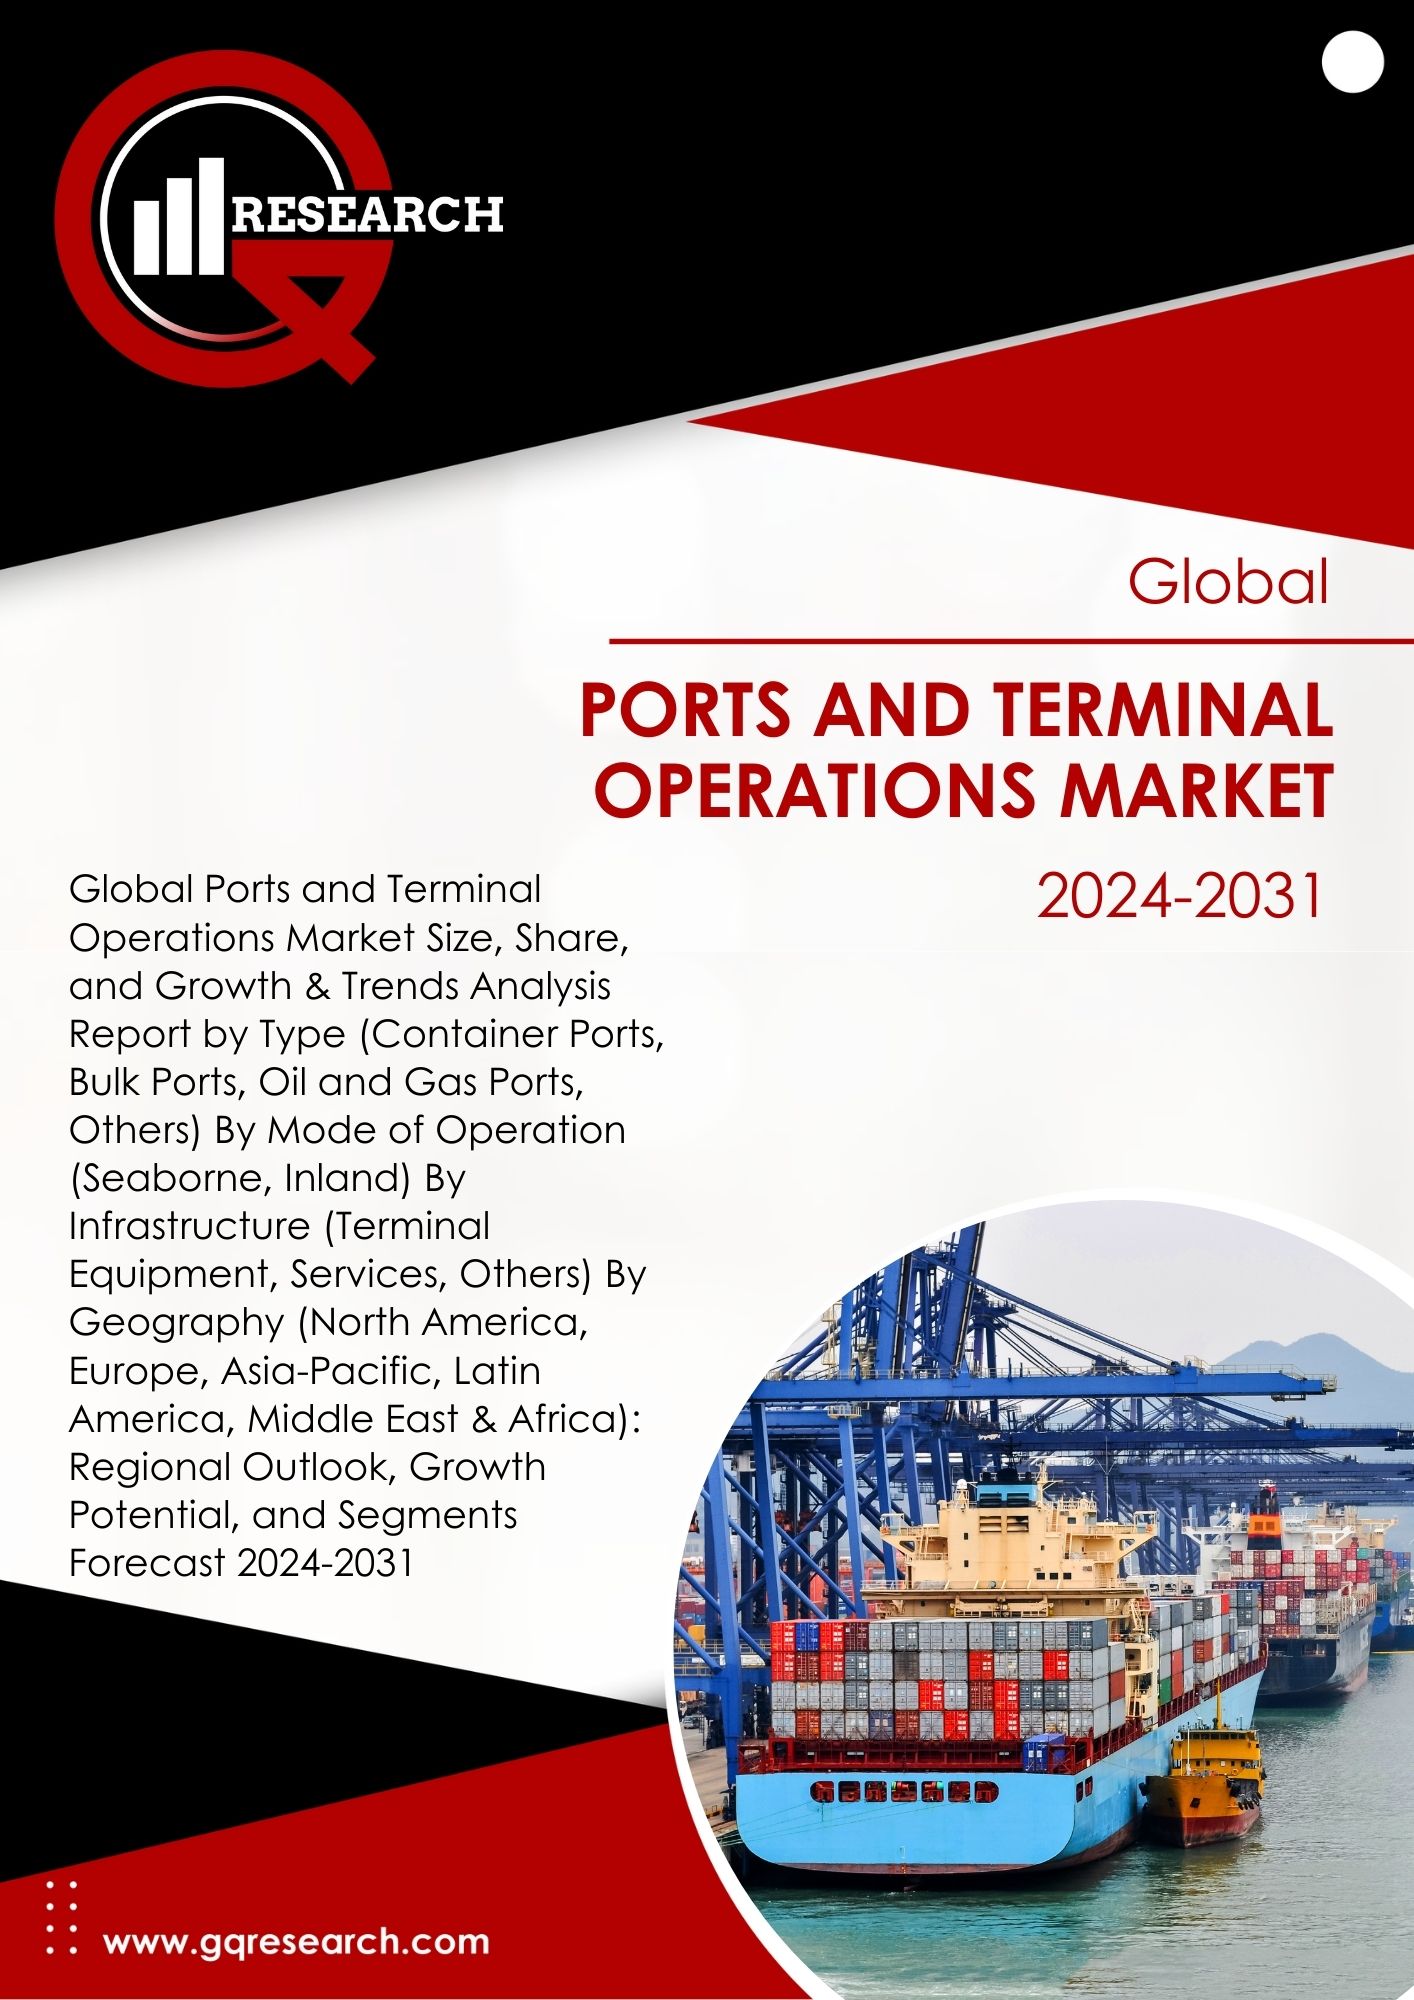 Ports and Terminal Operations Market Forecast 2024-2031 | GQ Research